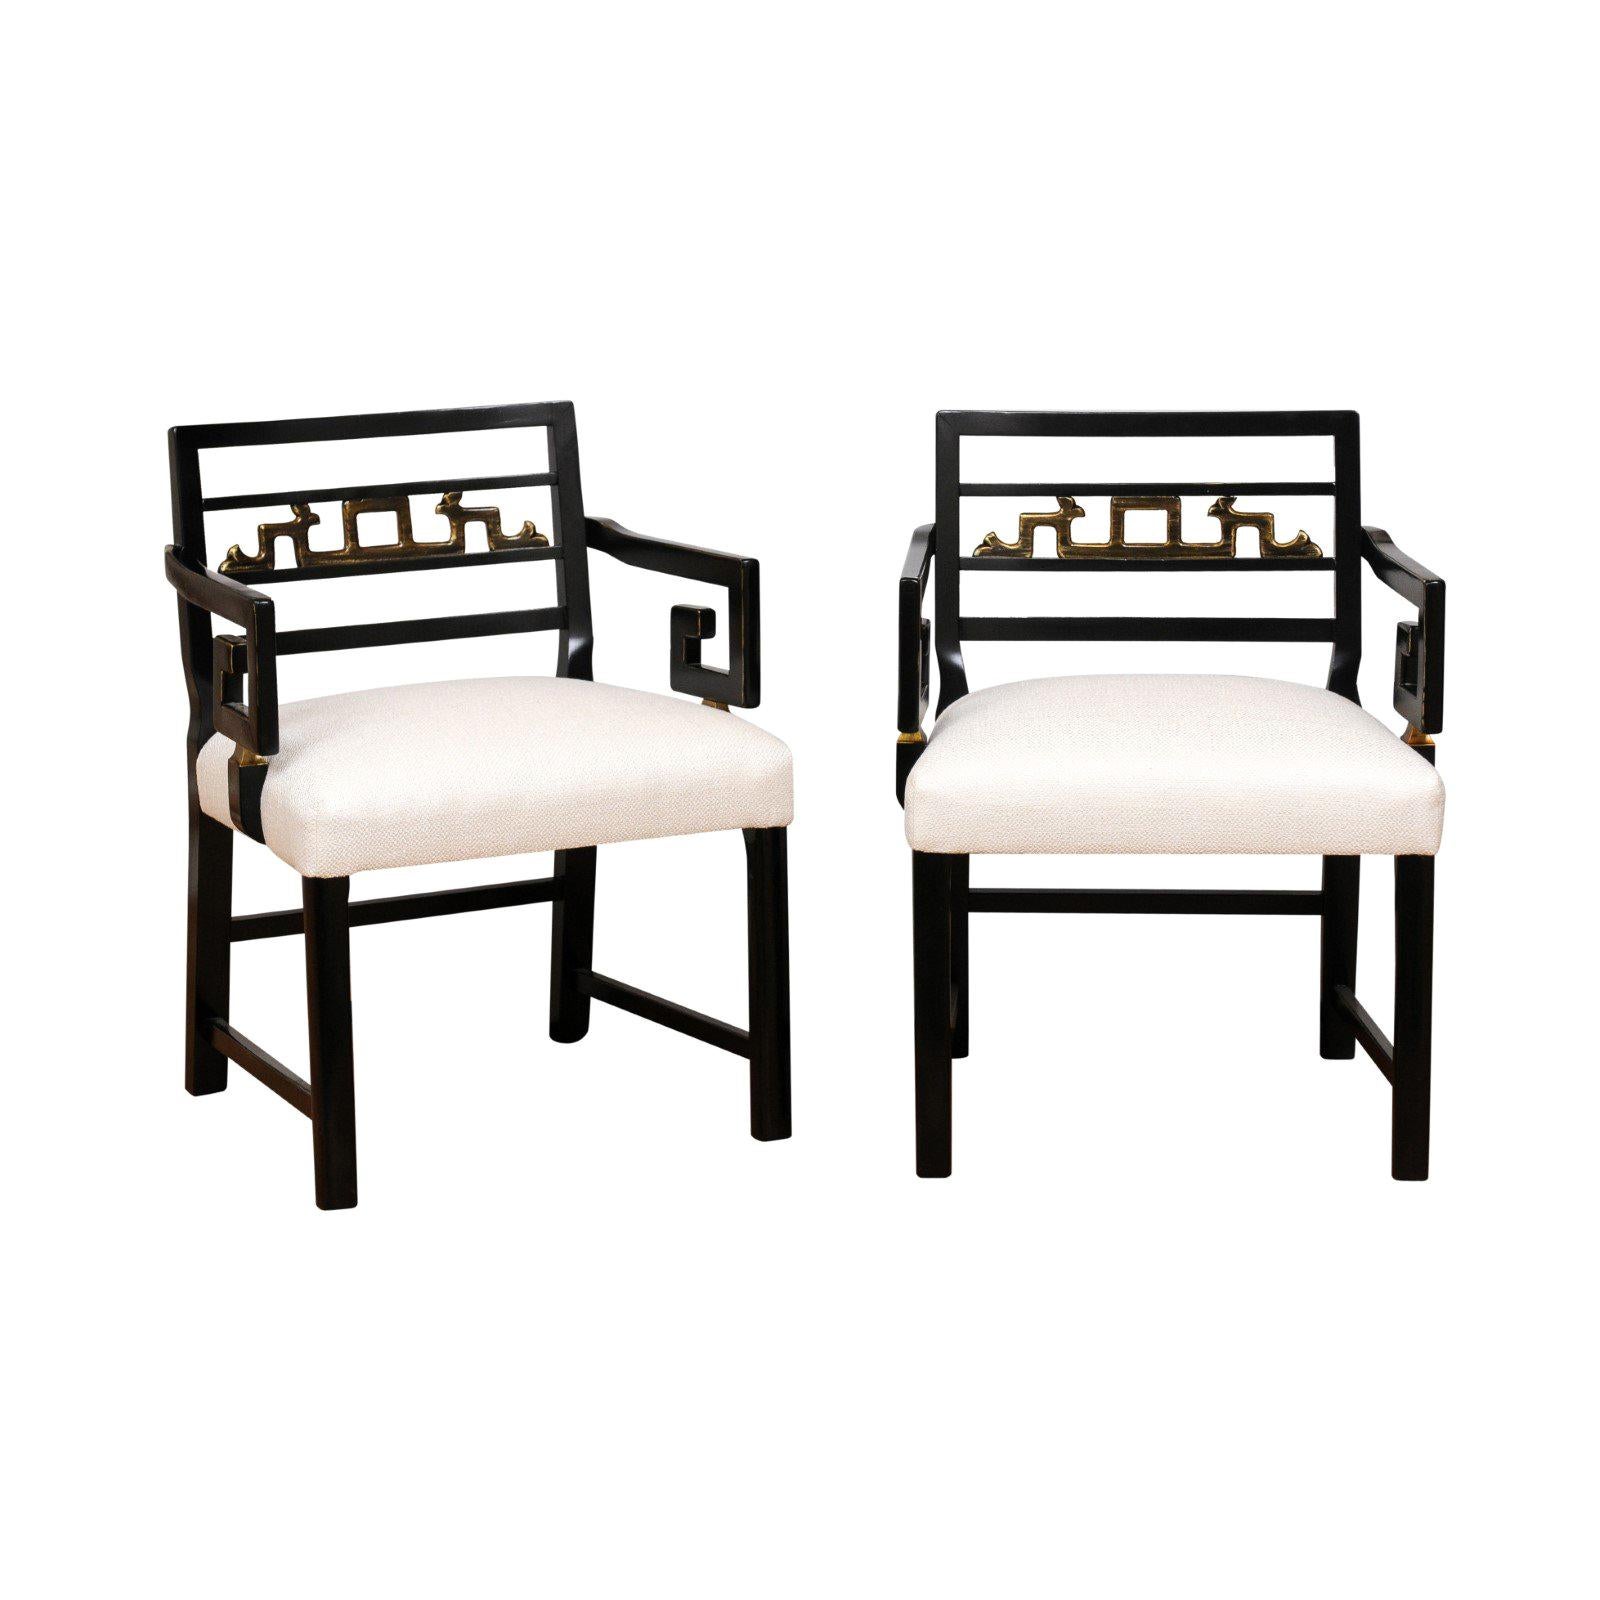 Exquisite Pair of Modern Chinoiserie Greek Key Armchairs by Baker, circa 1960